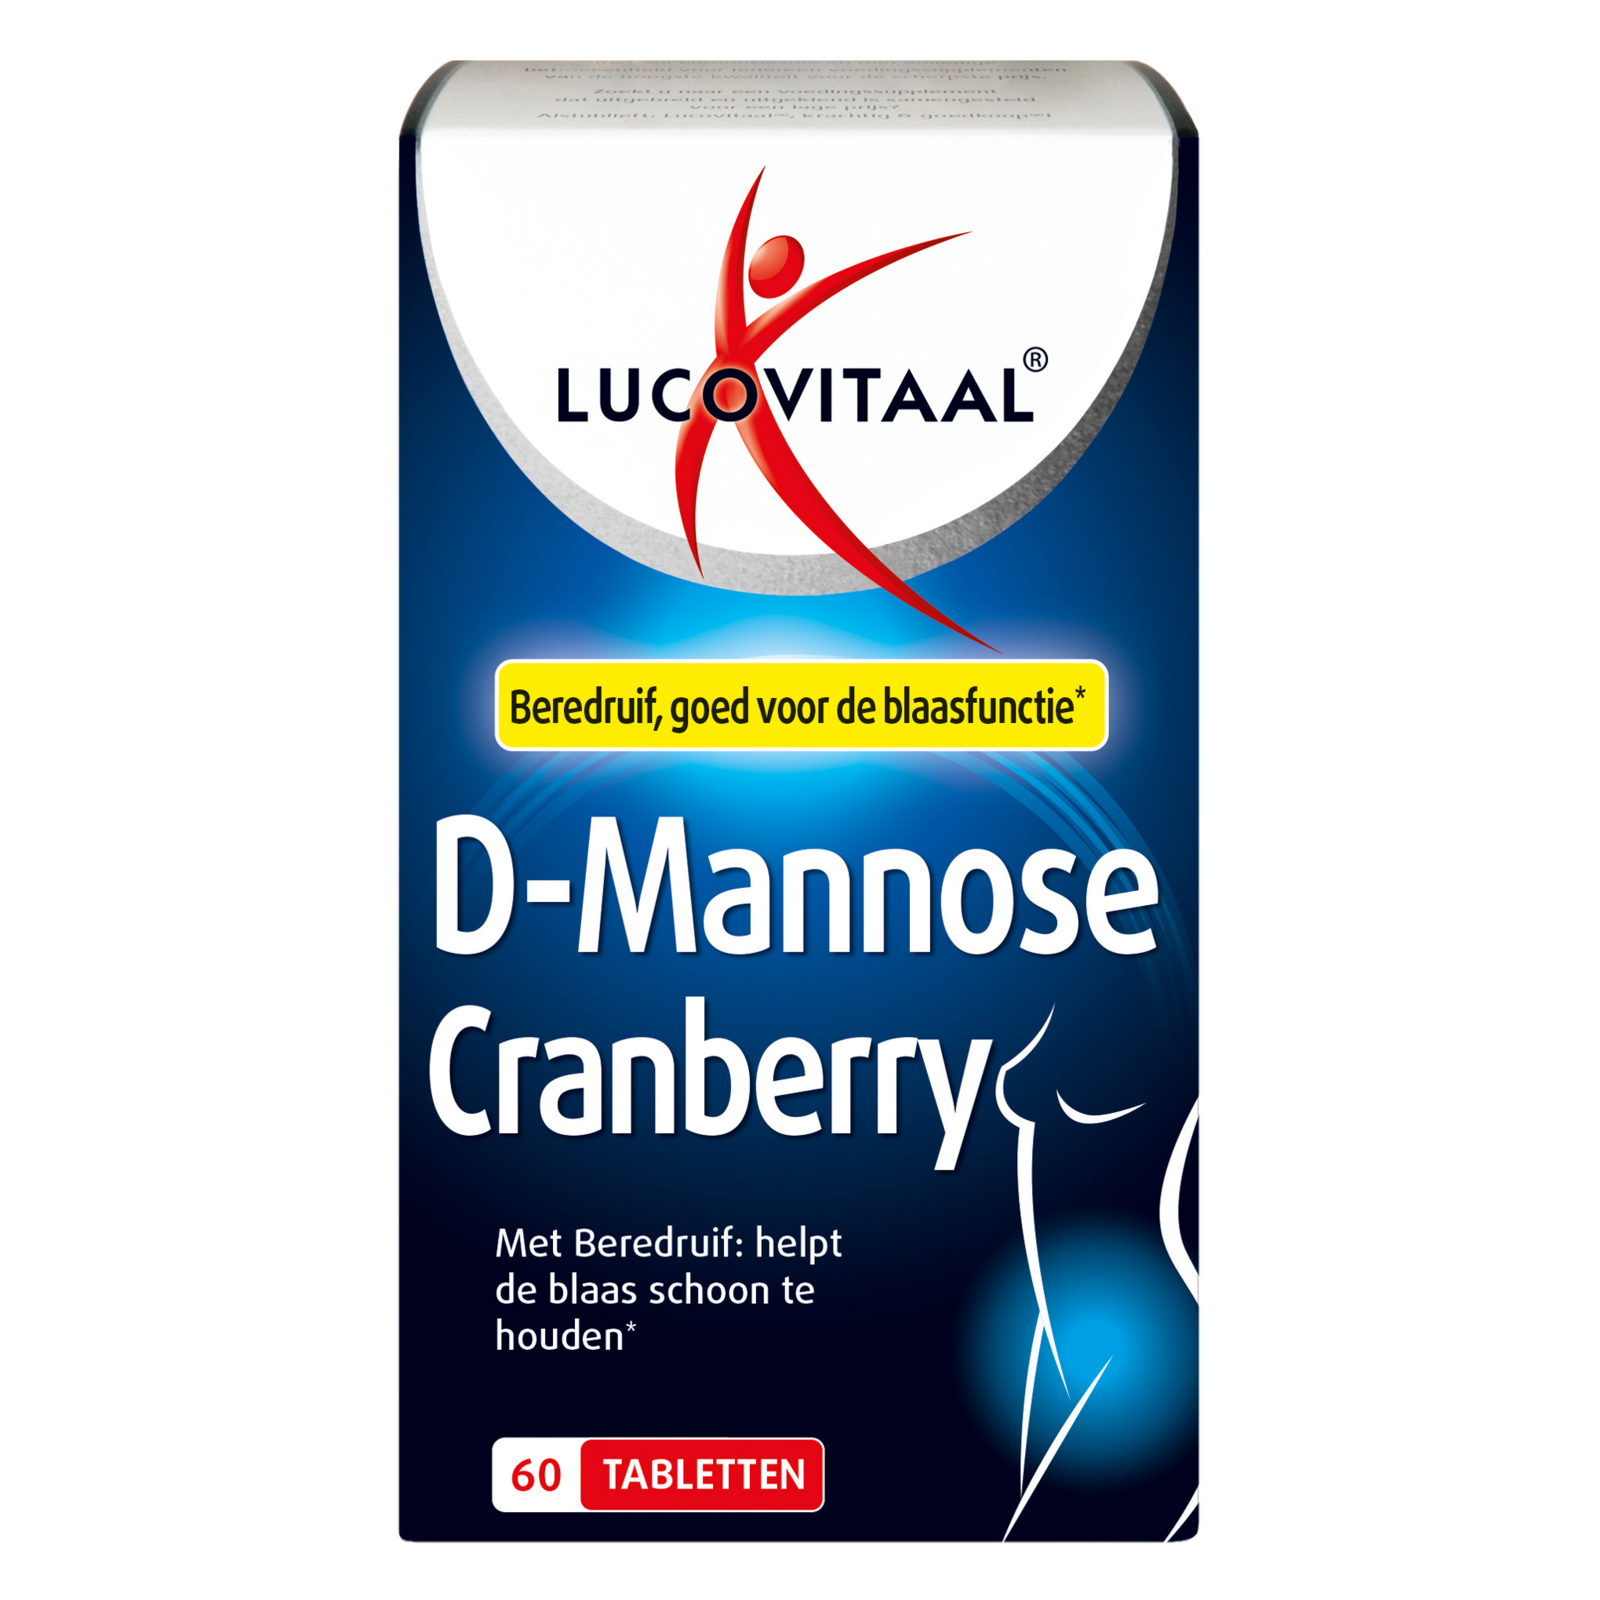 Lucovitaal D-mannose Cranberry Tabletten